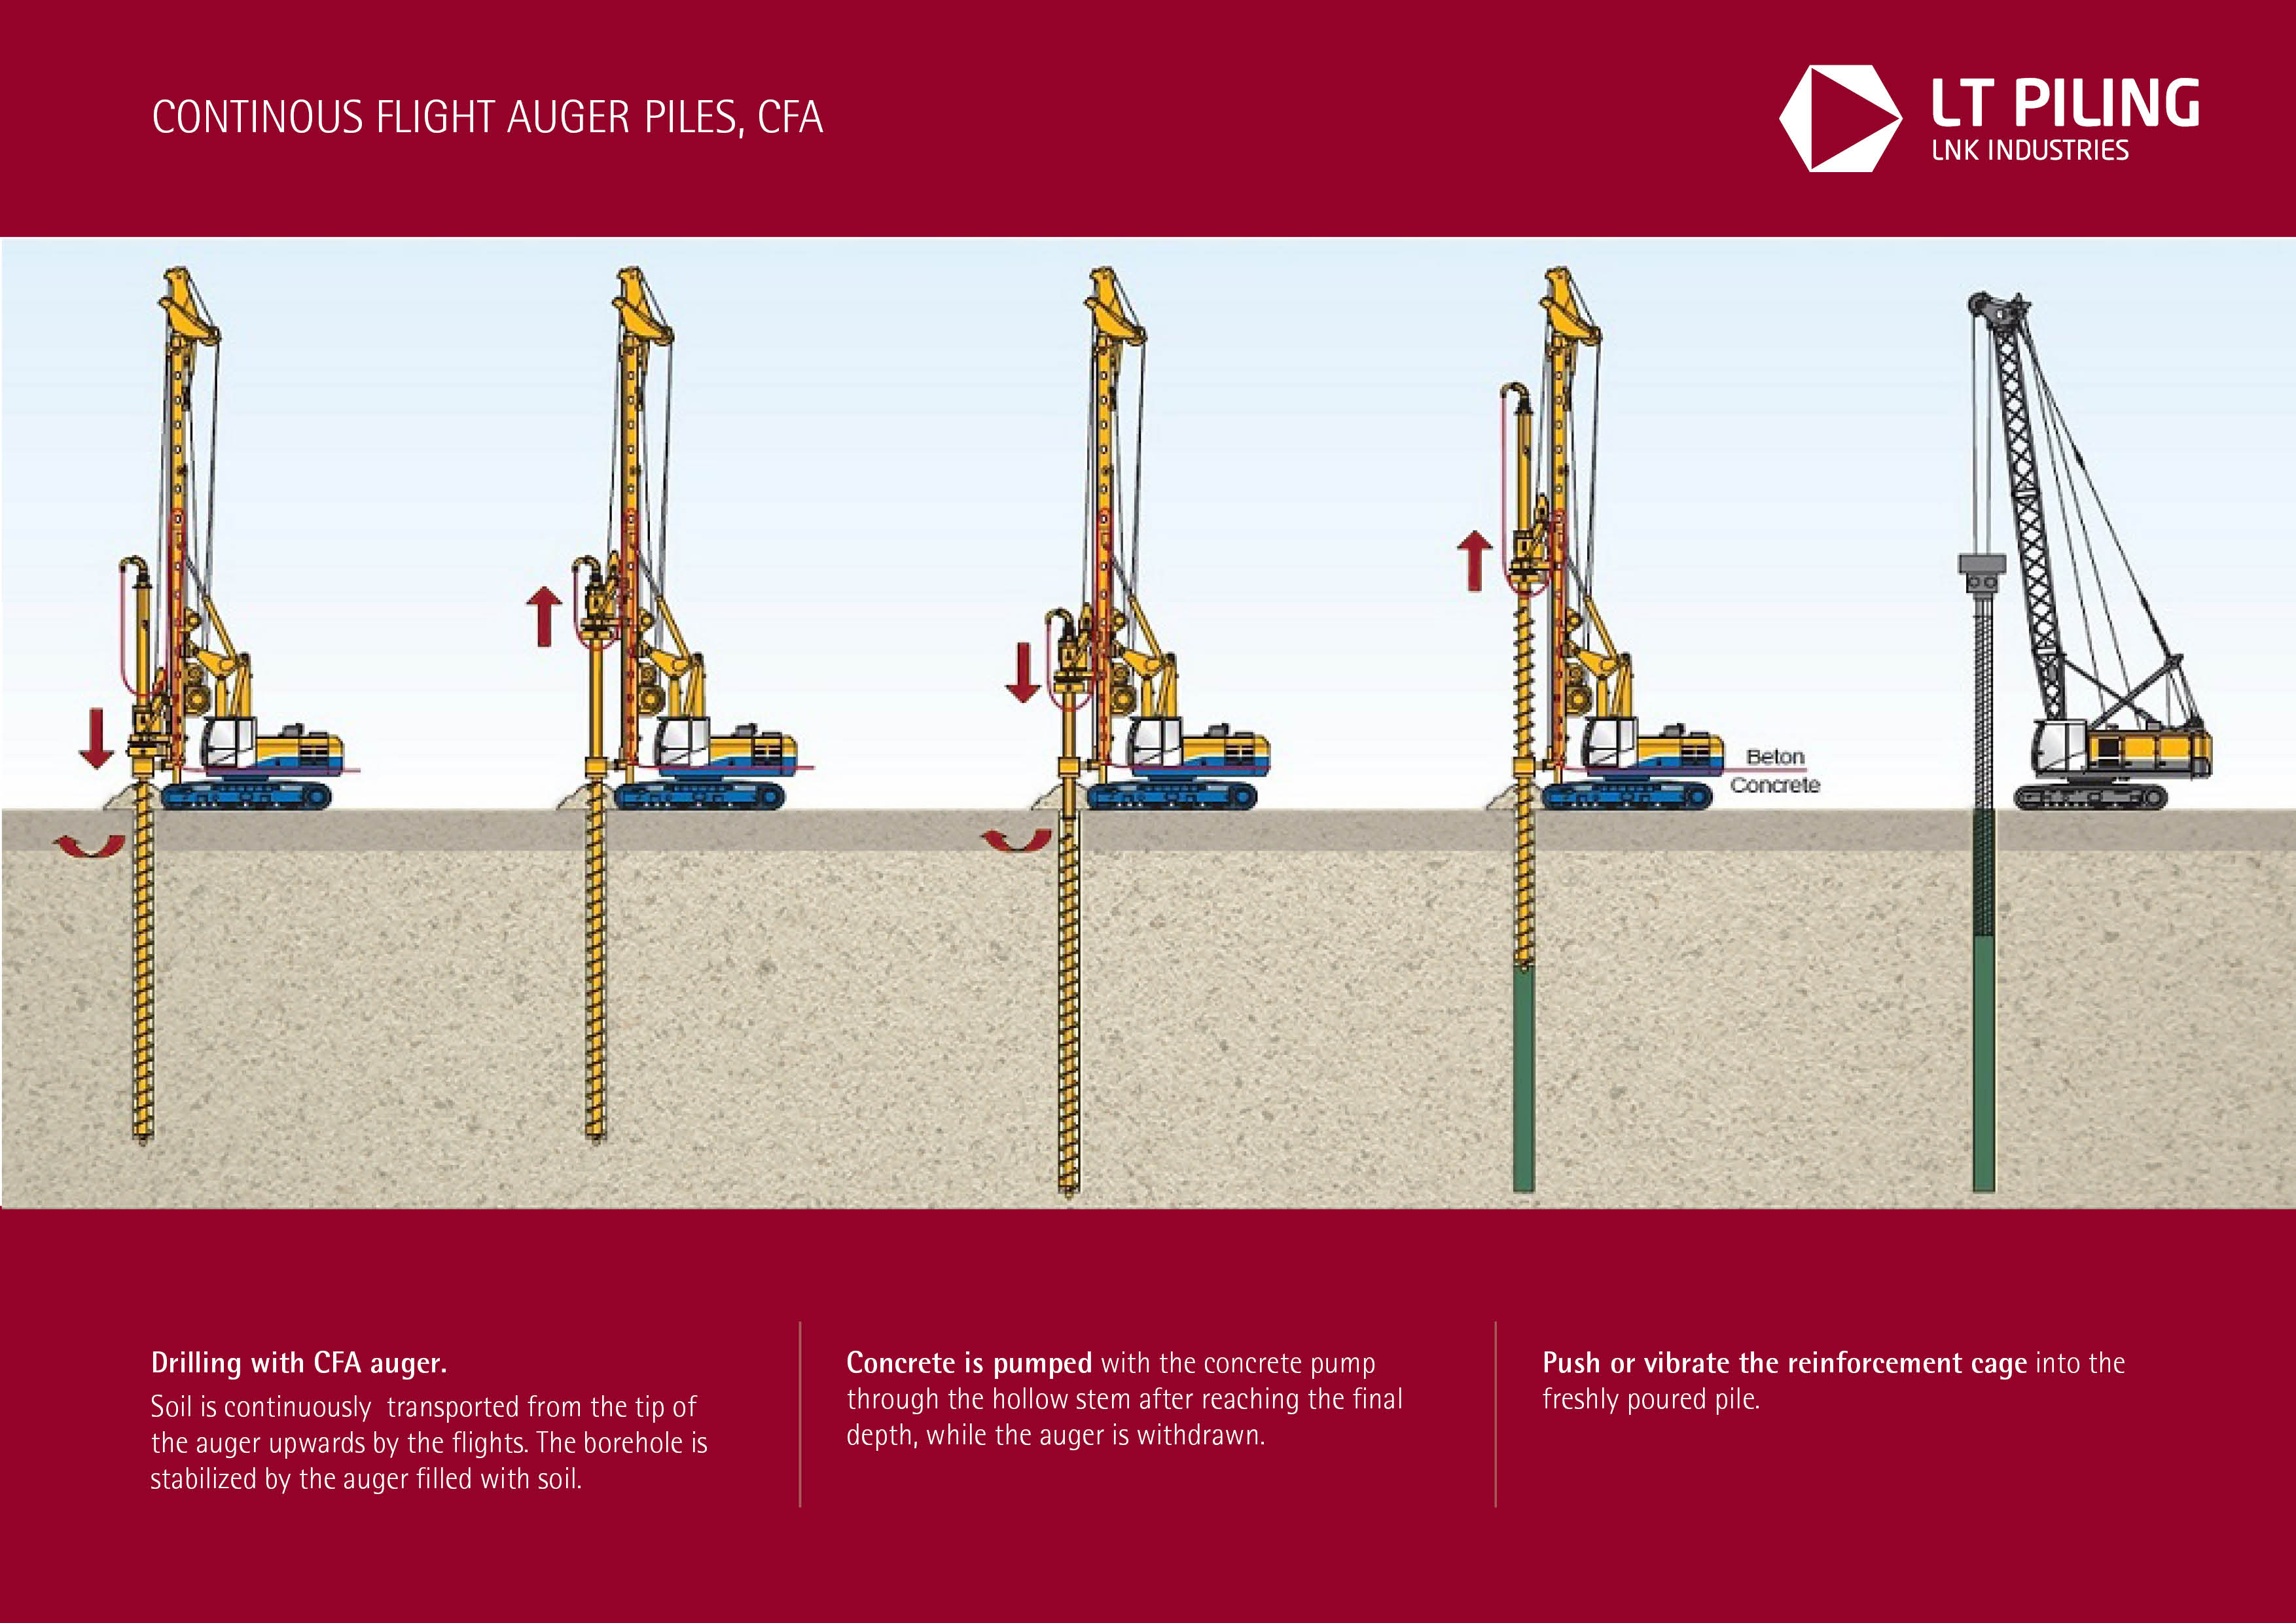 CFA (Drilling with Continuous Flight Auger) technology